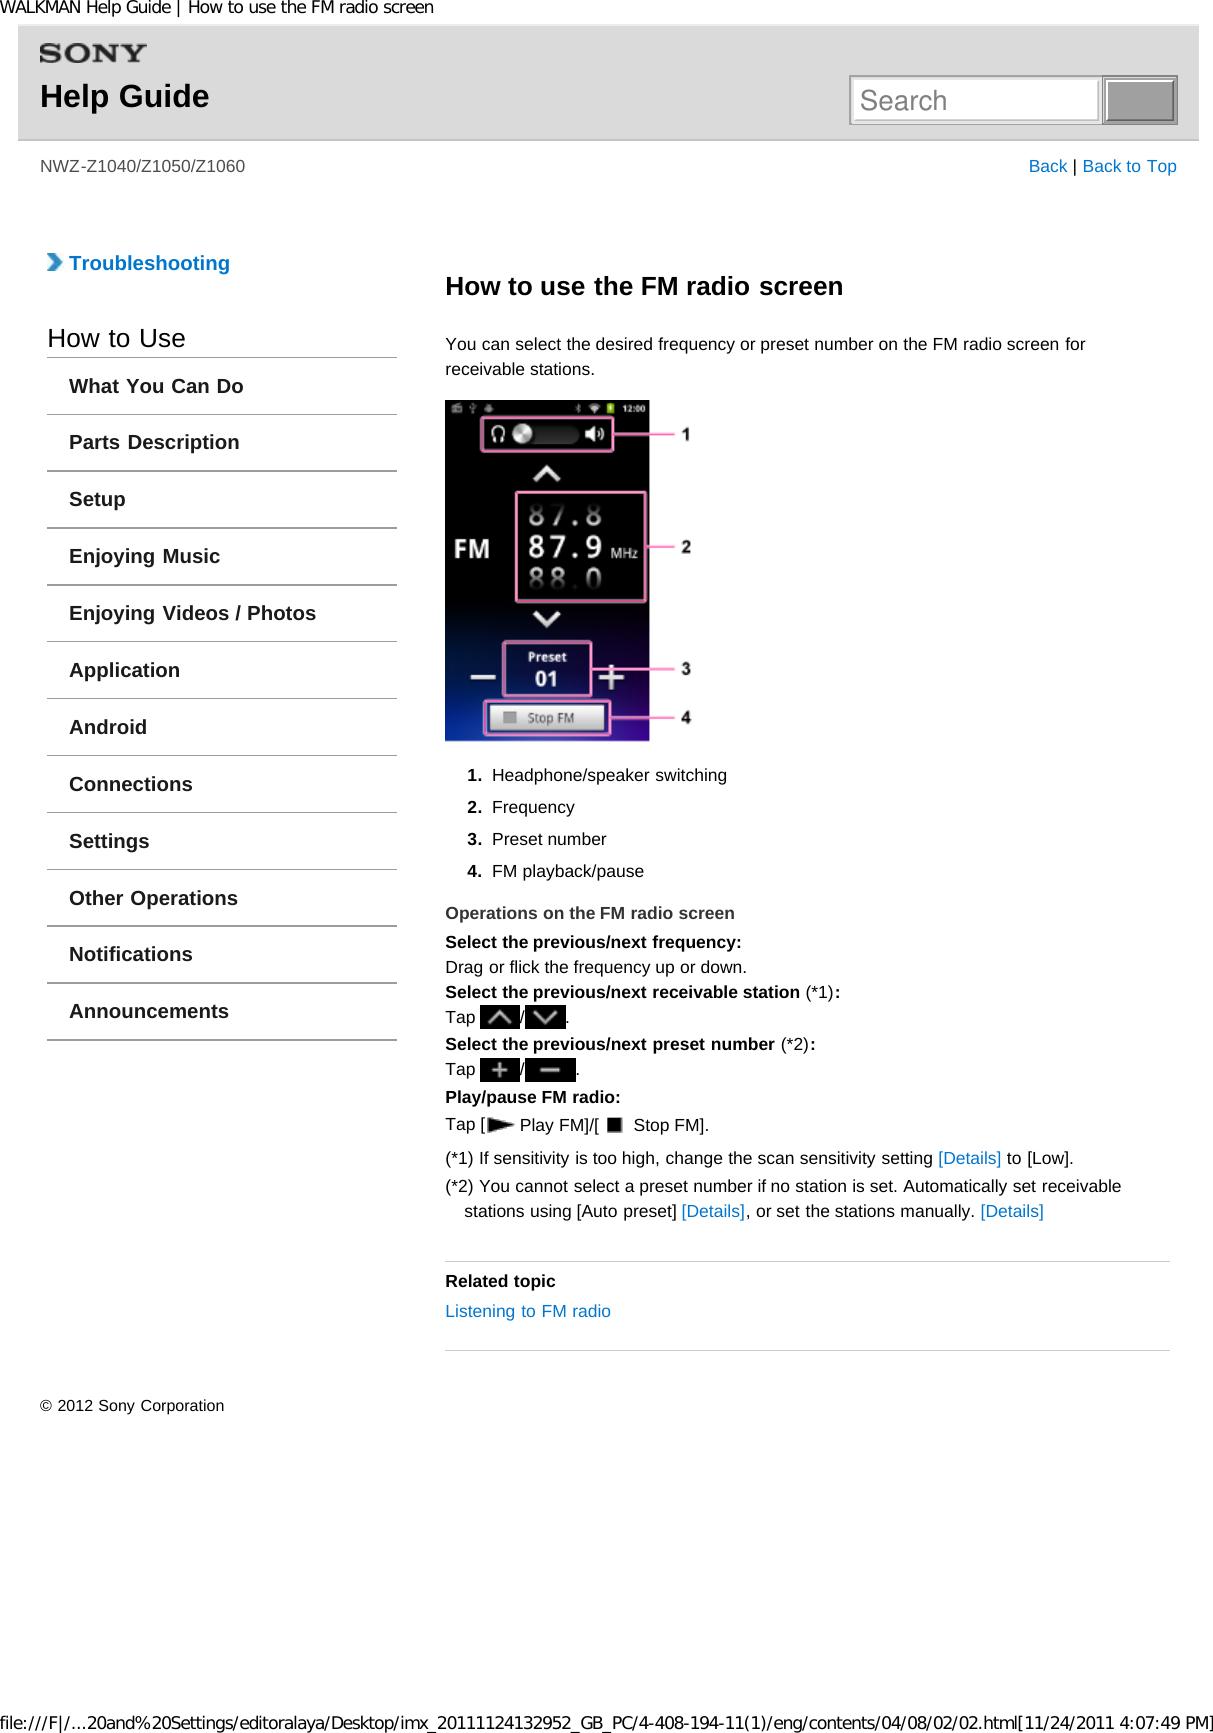 Page 121 of Sony Group NWZZ1000 Digital Media Player User Manual WALKMAN Help Guide   Top page